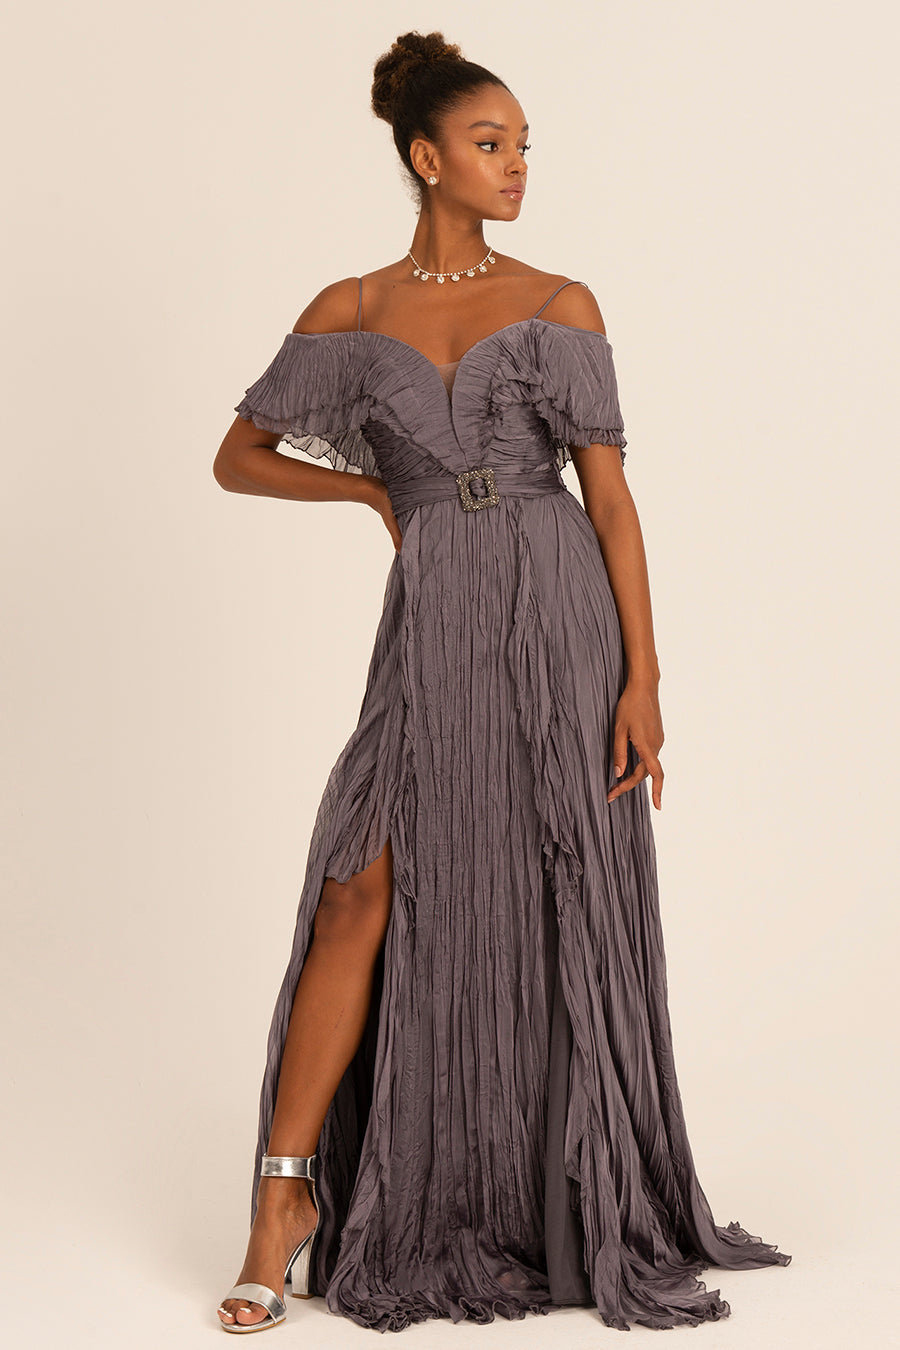 Diana - Mystic Evenings | Evening and Prom Dresses